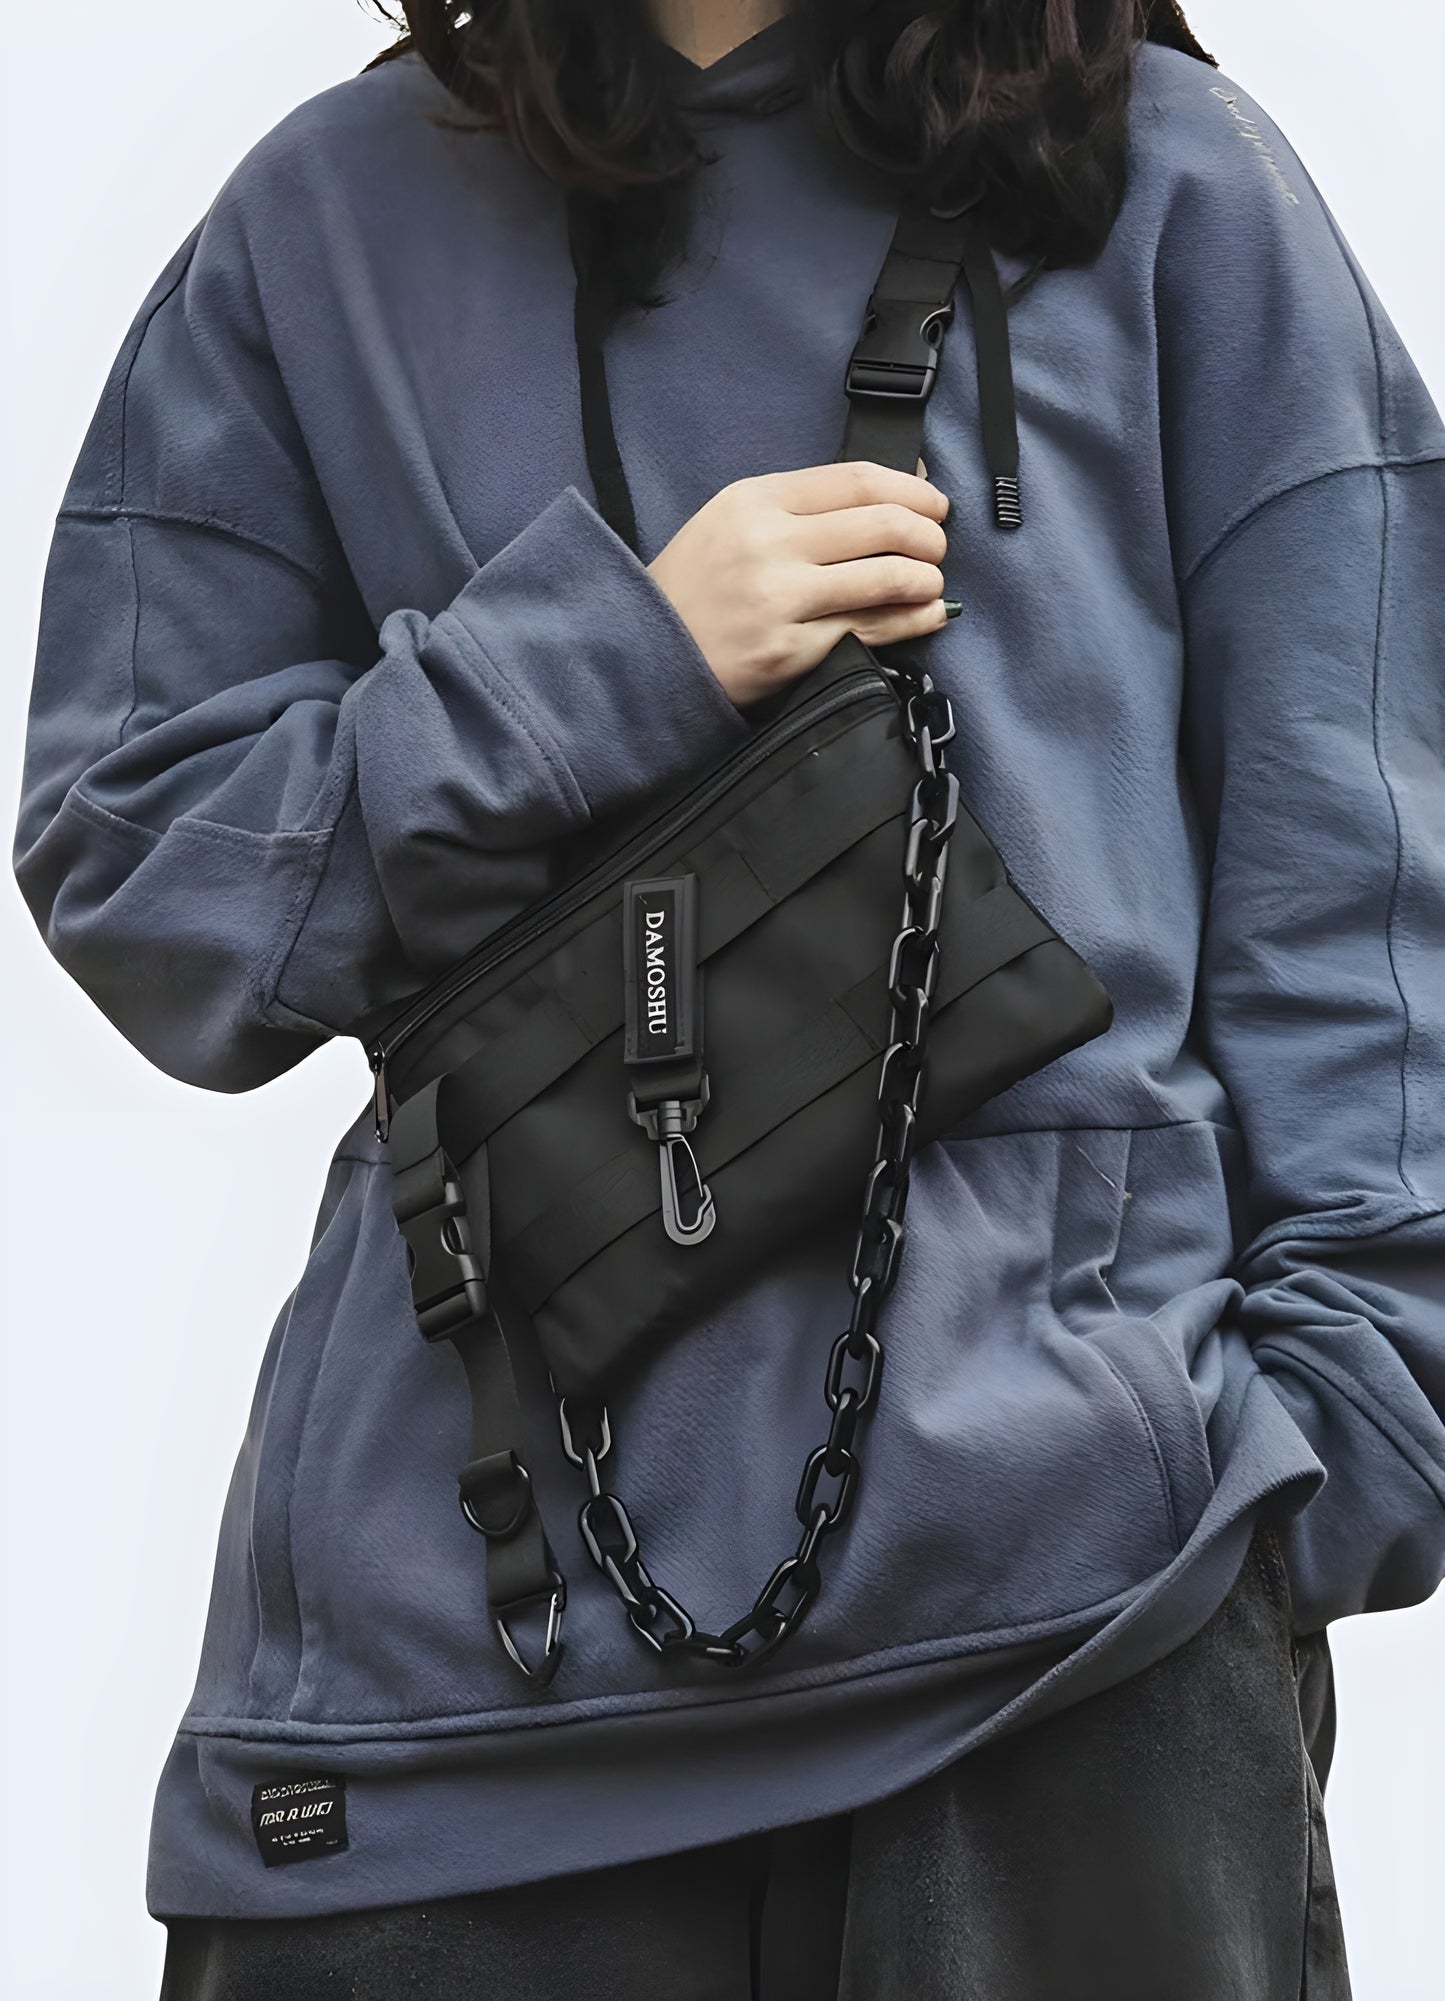  The small sling bag style is very popular in today’s streetwear and techwear clothing.